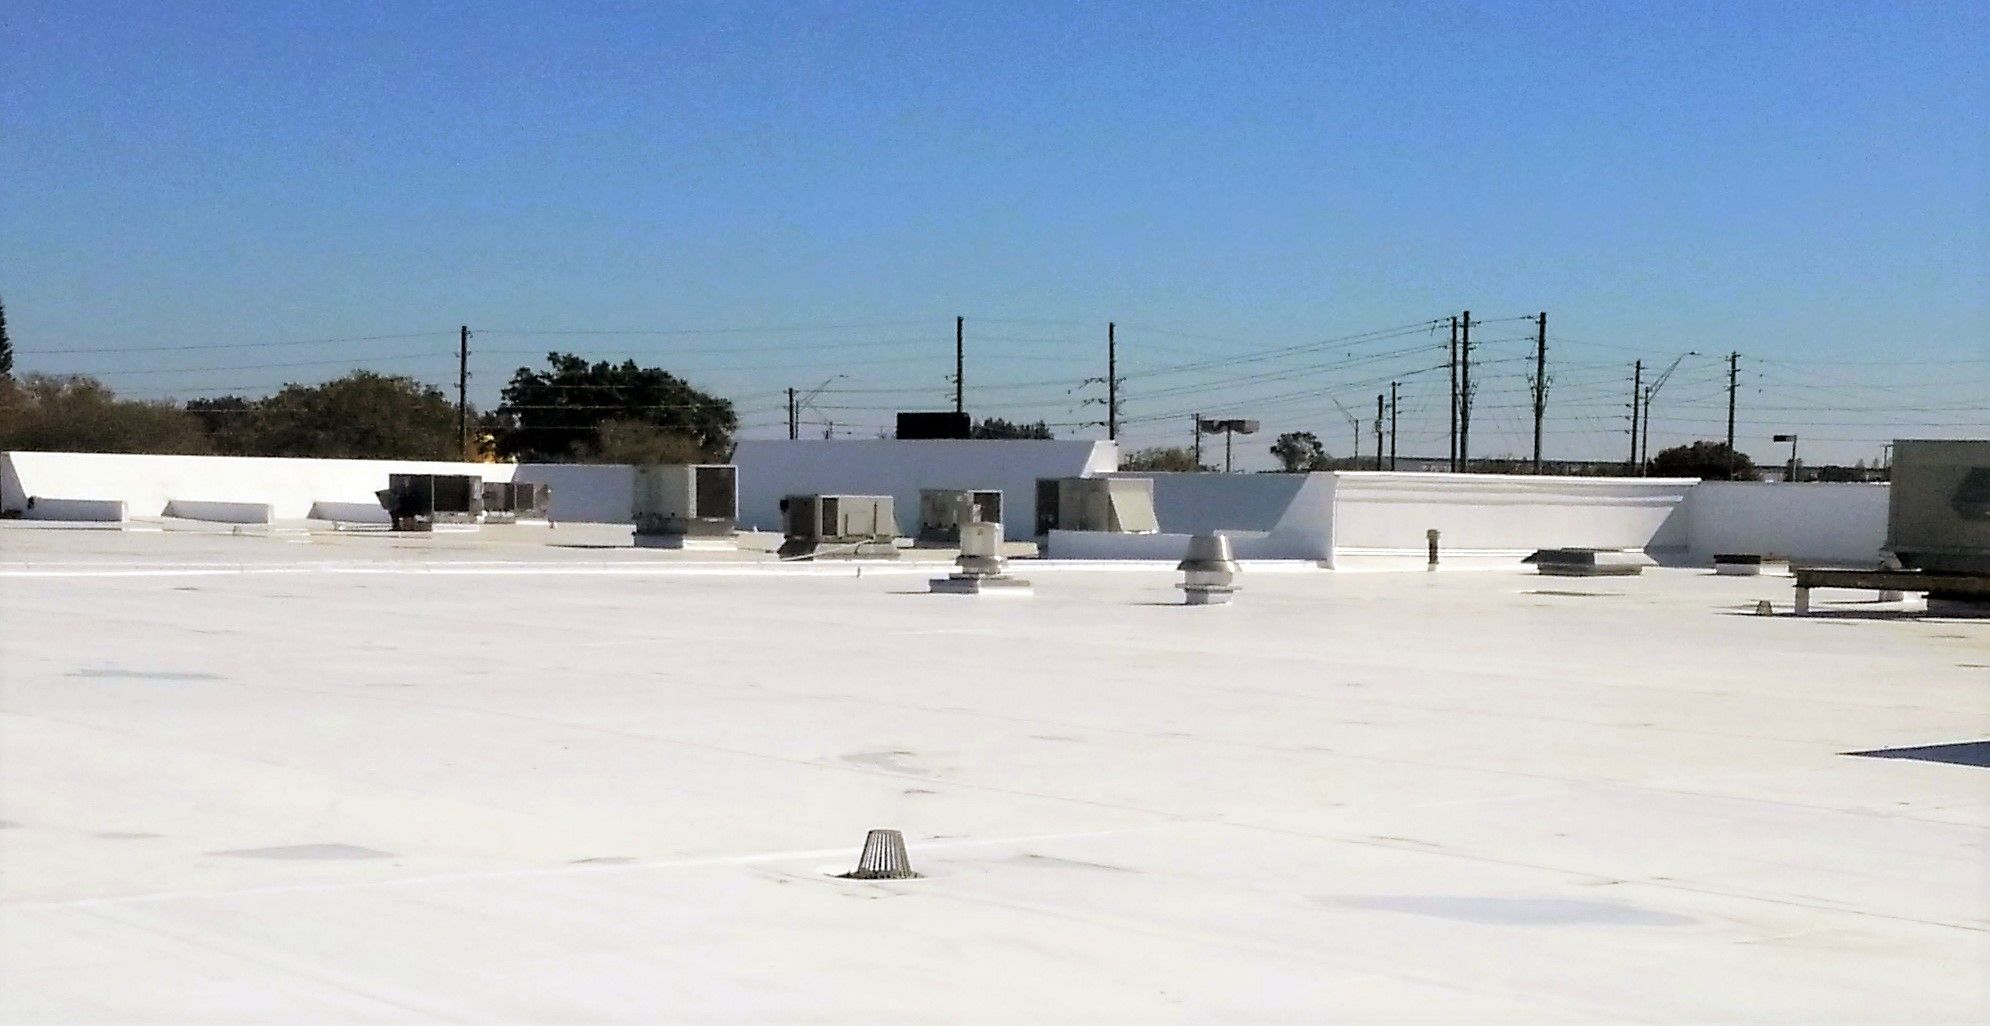 Commercial Flat Roof Alan S Roofing Central Florida Orlando Tampa